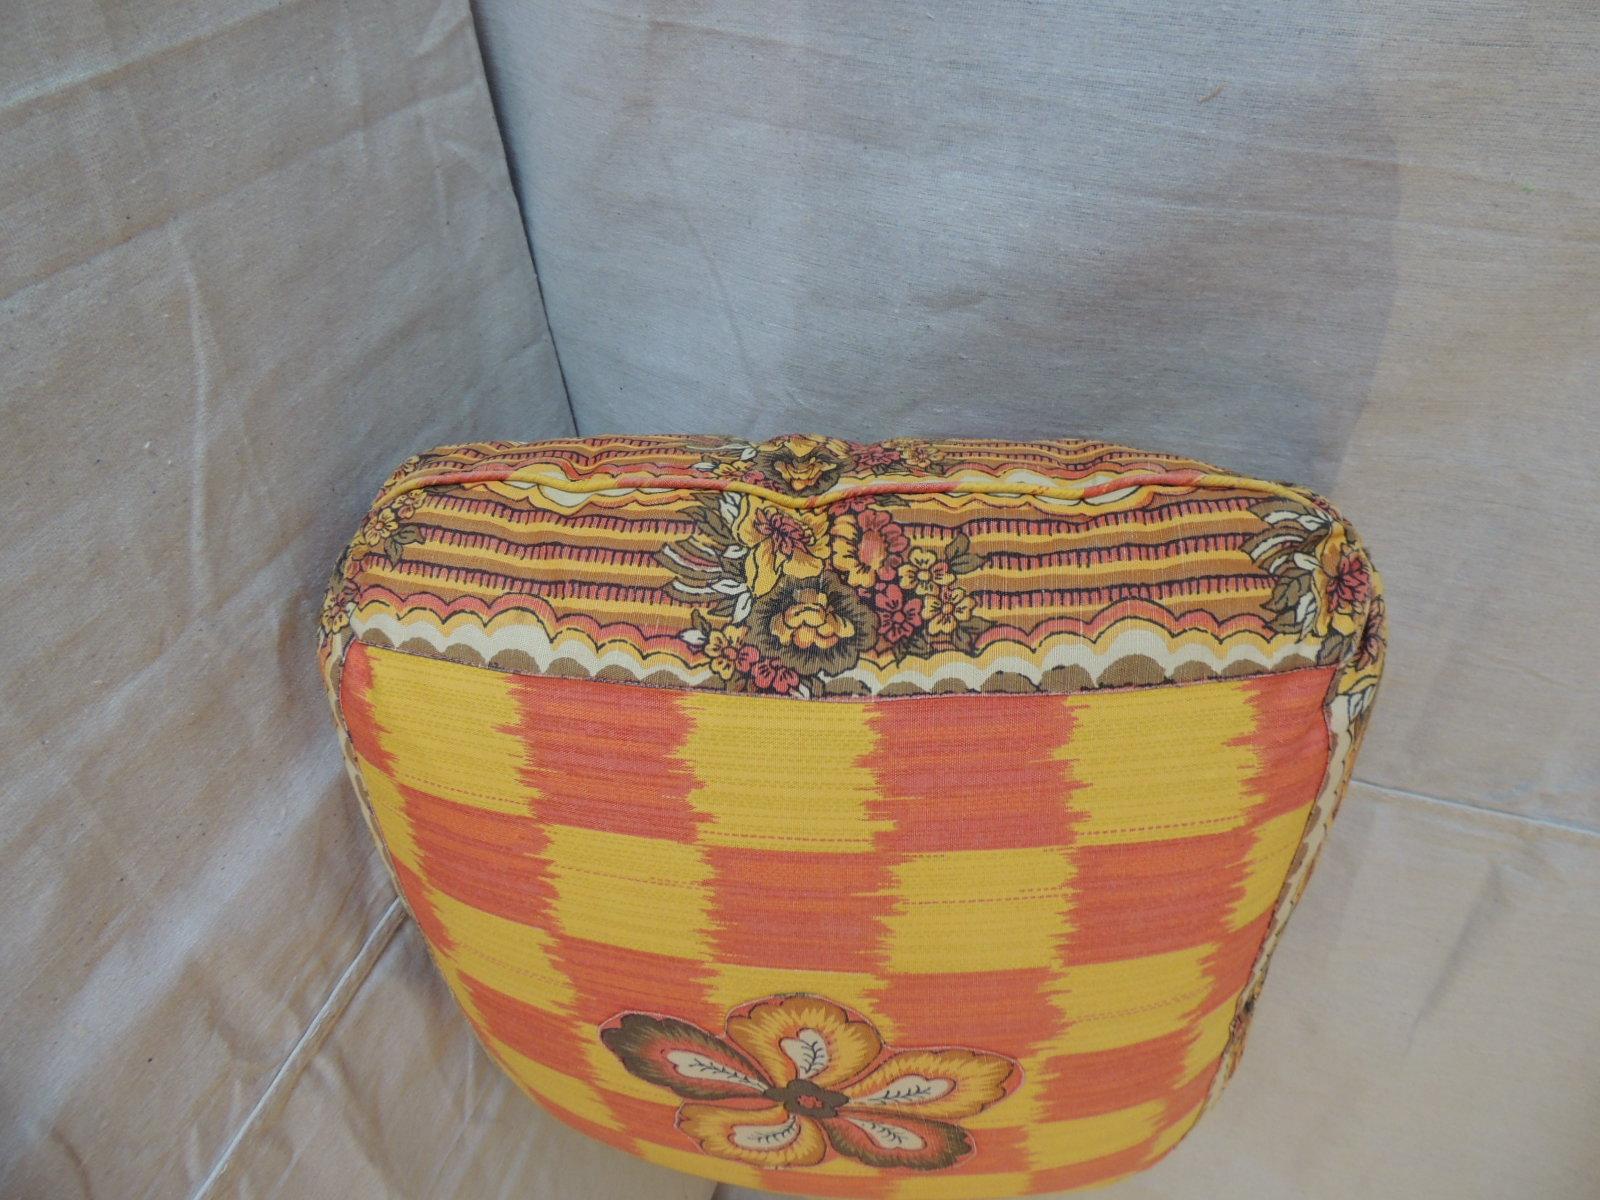 Vintage yellow and orange batik and Ikat decorative square pillow,
Double sided, self welt, Turkish corners and applique flowers in the center
of each pillow side.
100% down filled.
Size: 22